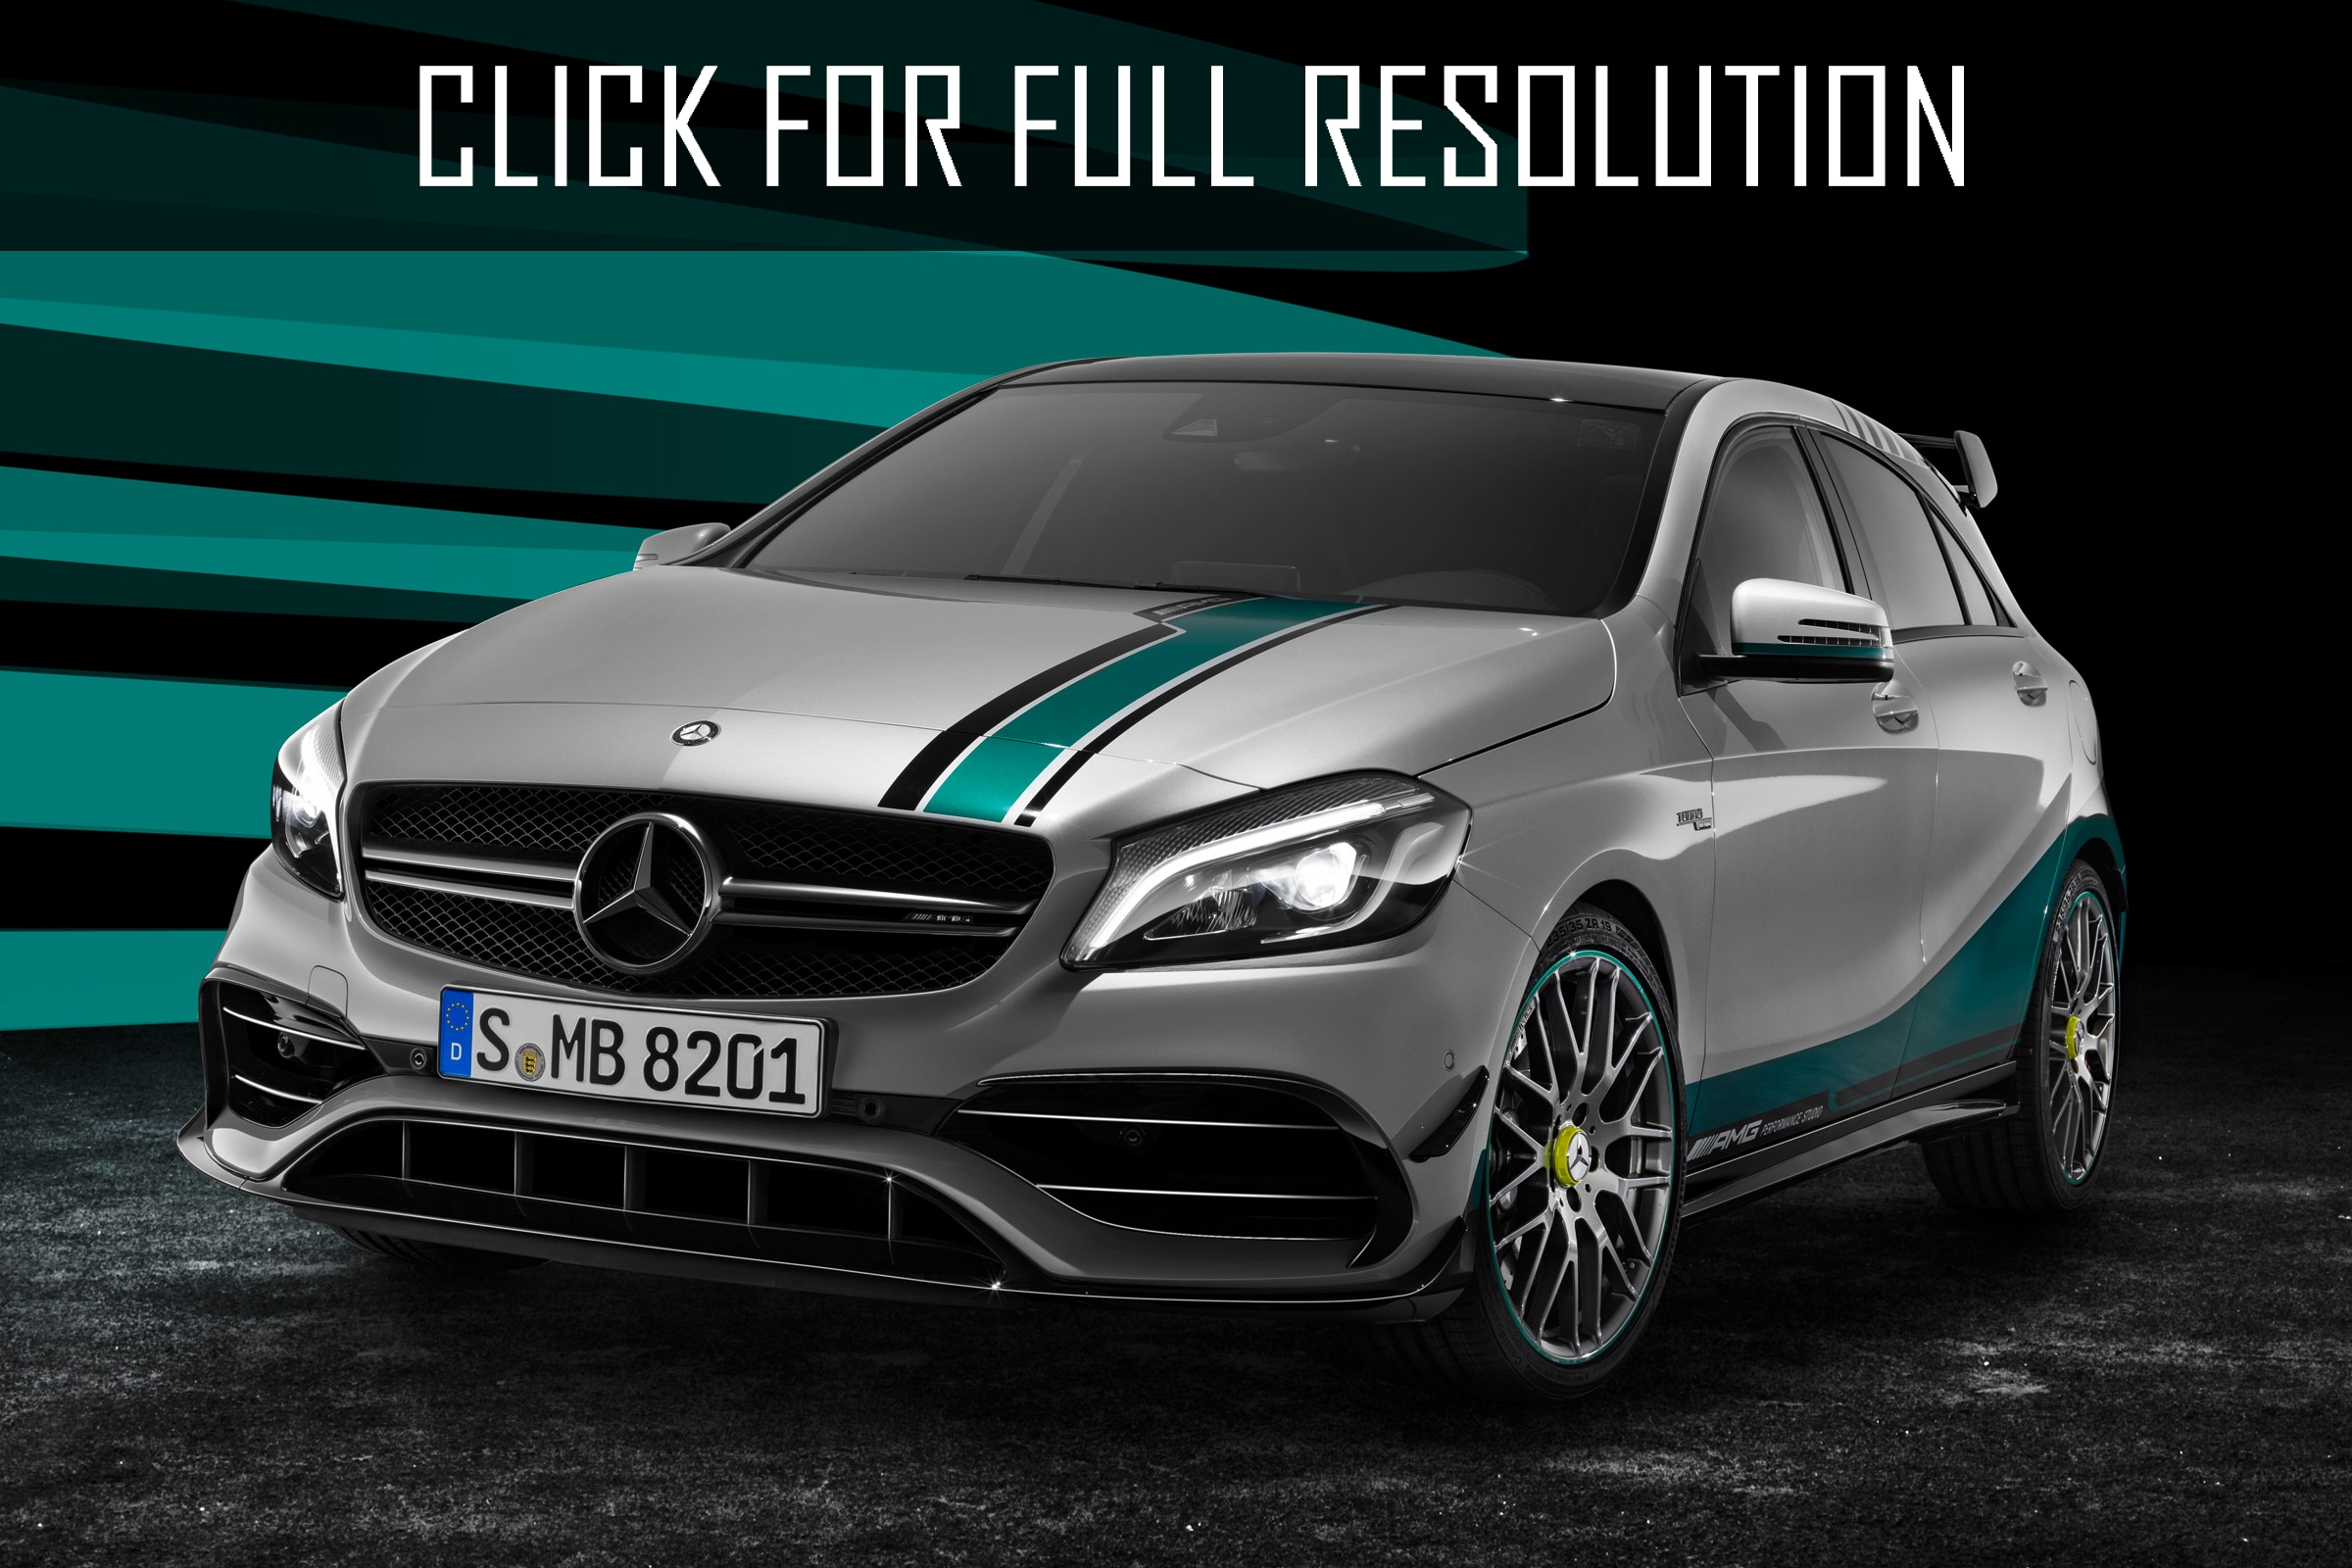 Mercedes Benz Amg 45 Limited Edition